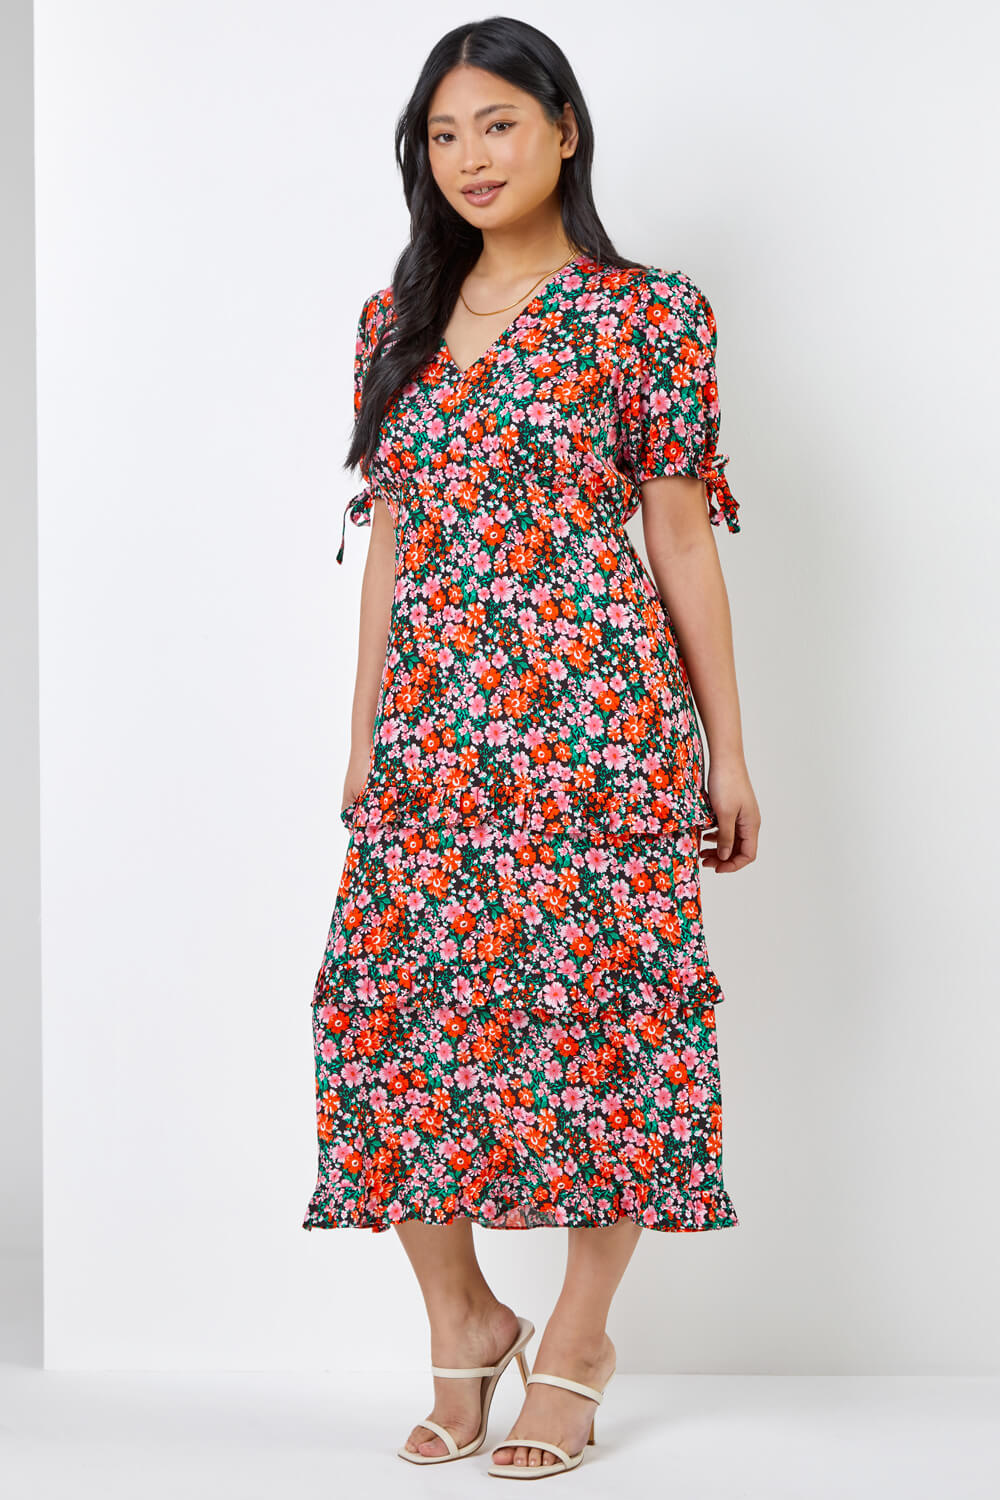 Petite Ditsy Floral Tiered Dress in Red - Roman Originals UK